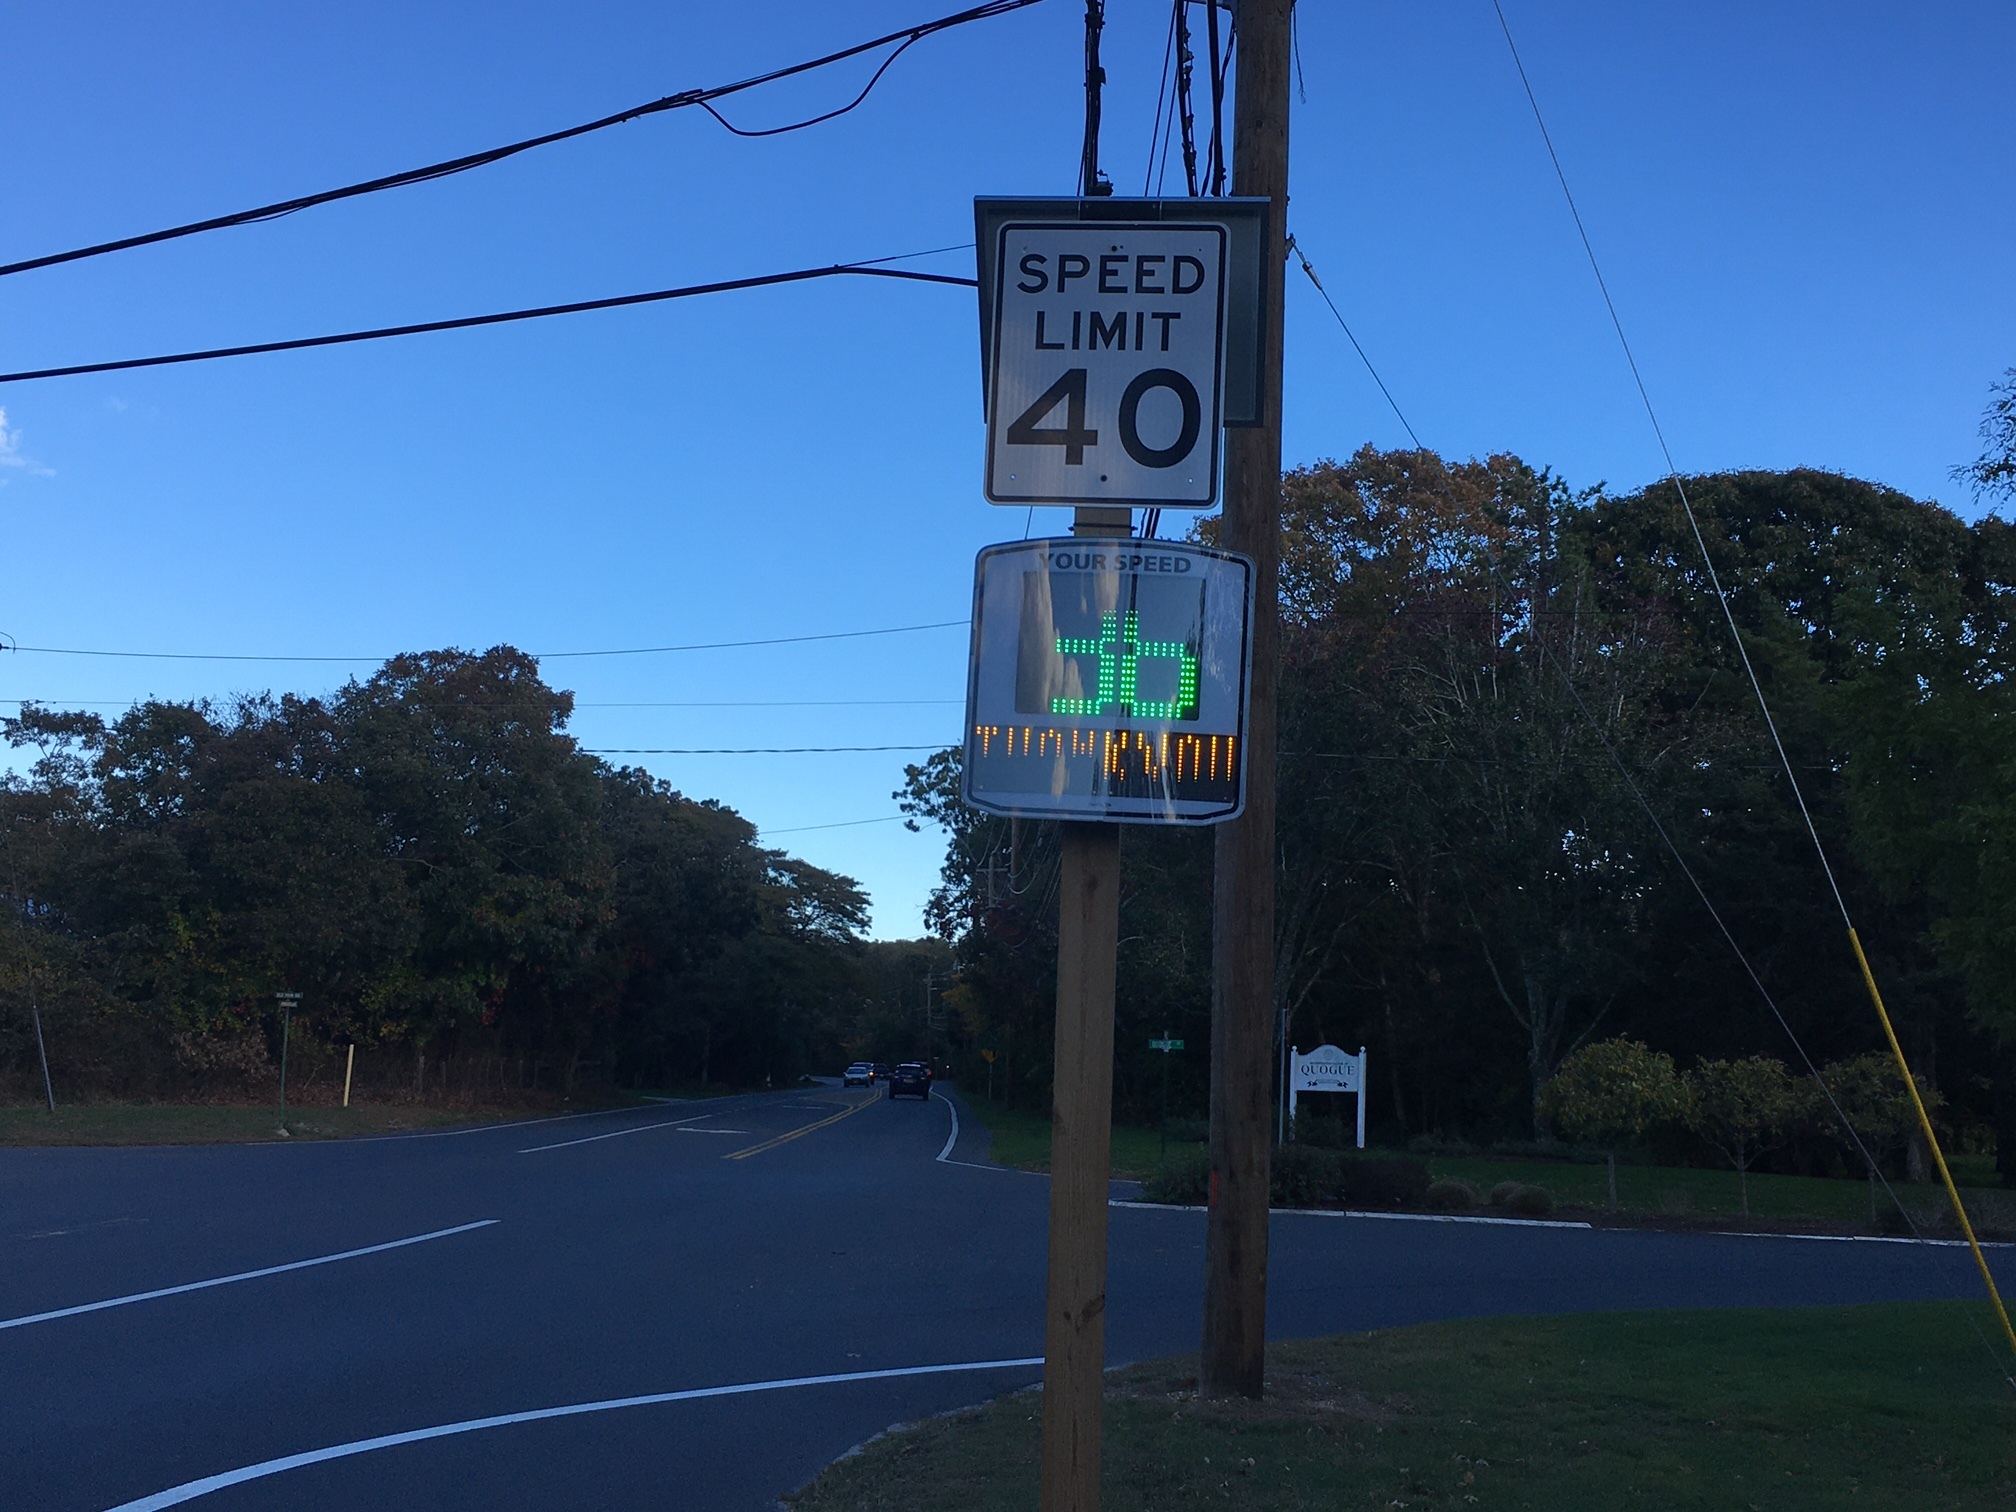 One of the speed signs on Montauk Highway in Quogue Village.